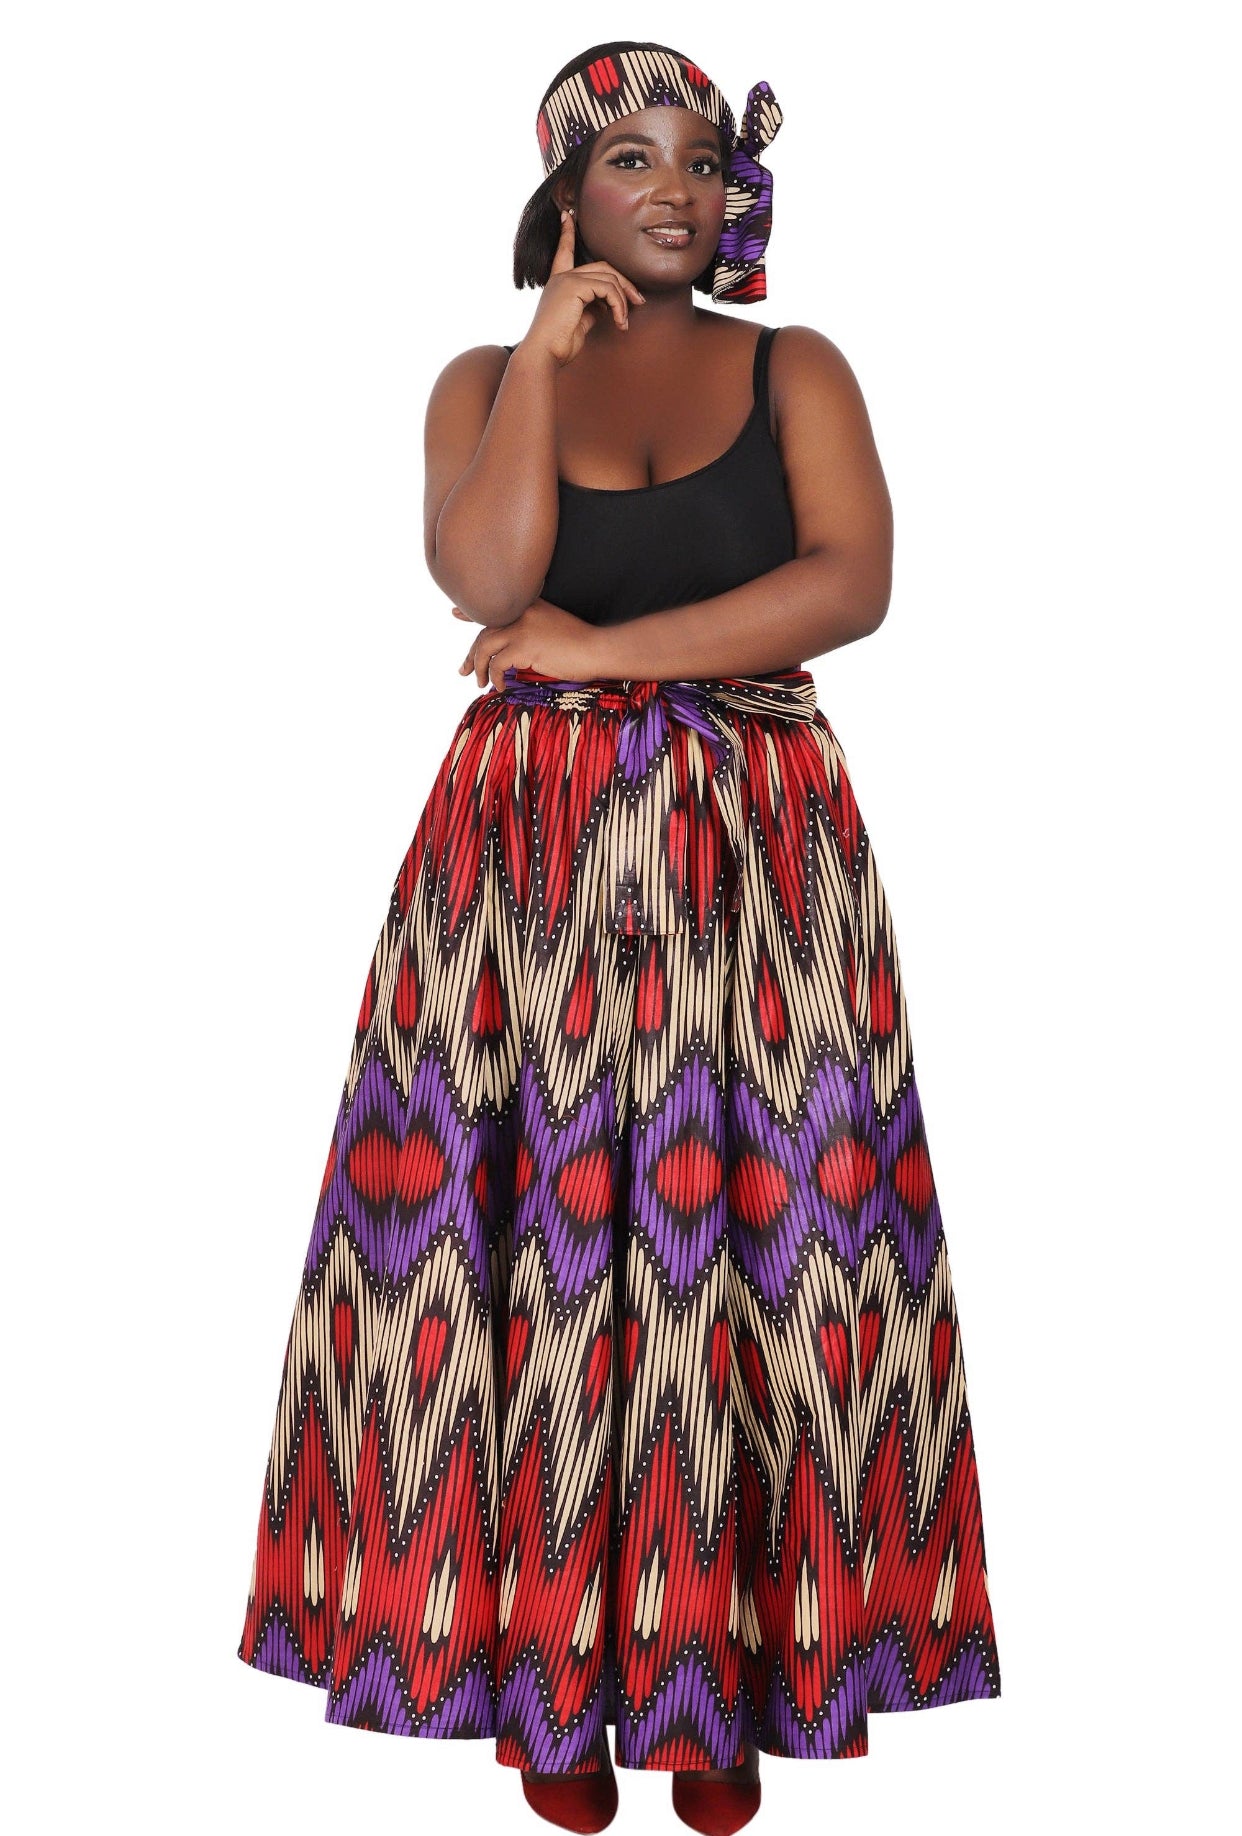 African Print Full Skirt with Coordinating Head Wrap (Purple, Red, Beige, Black)